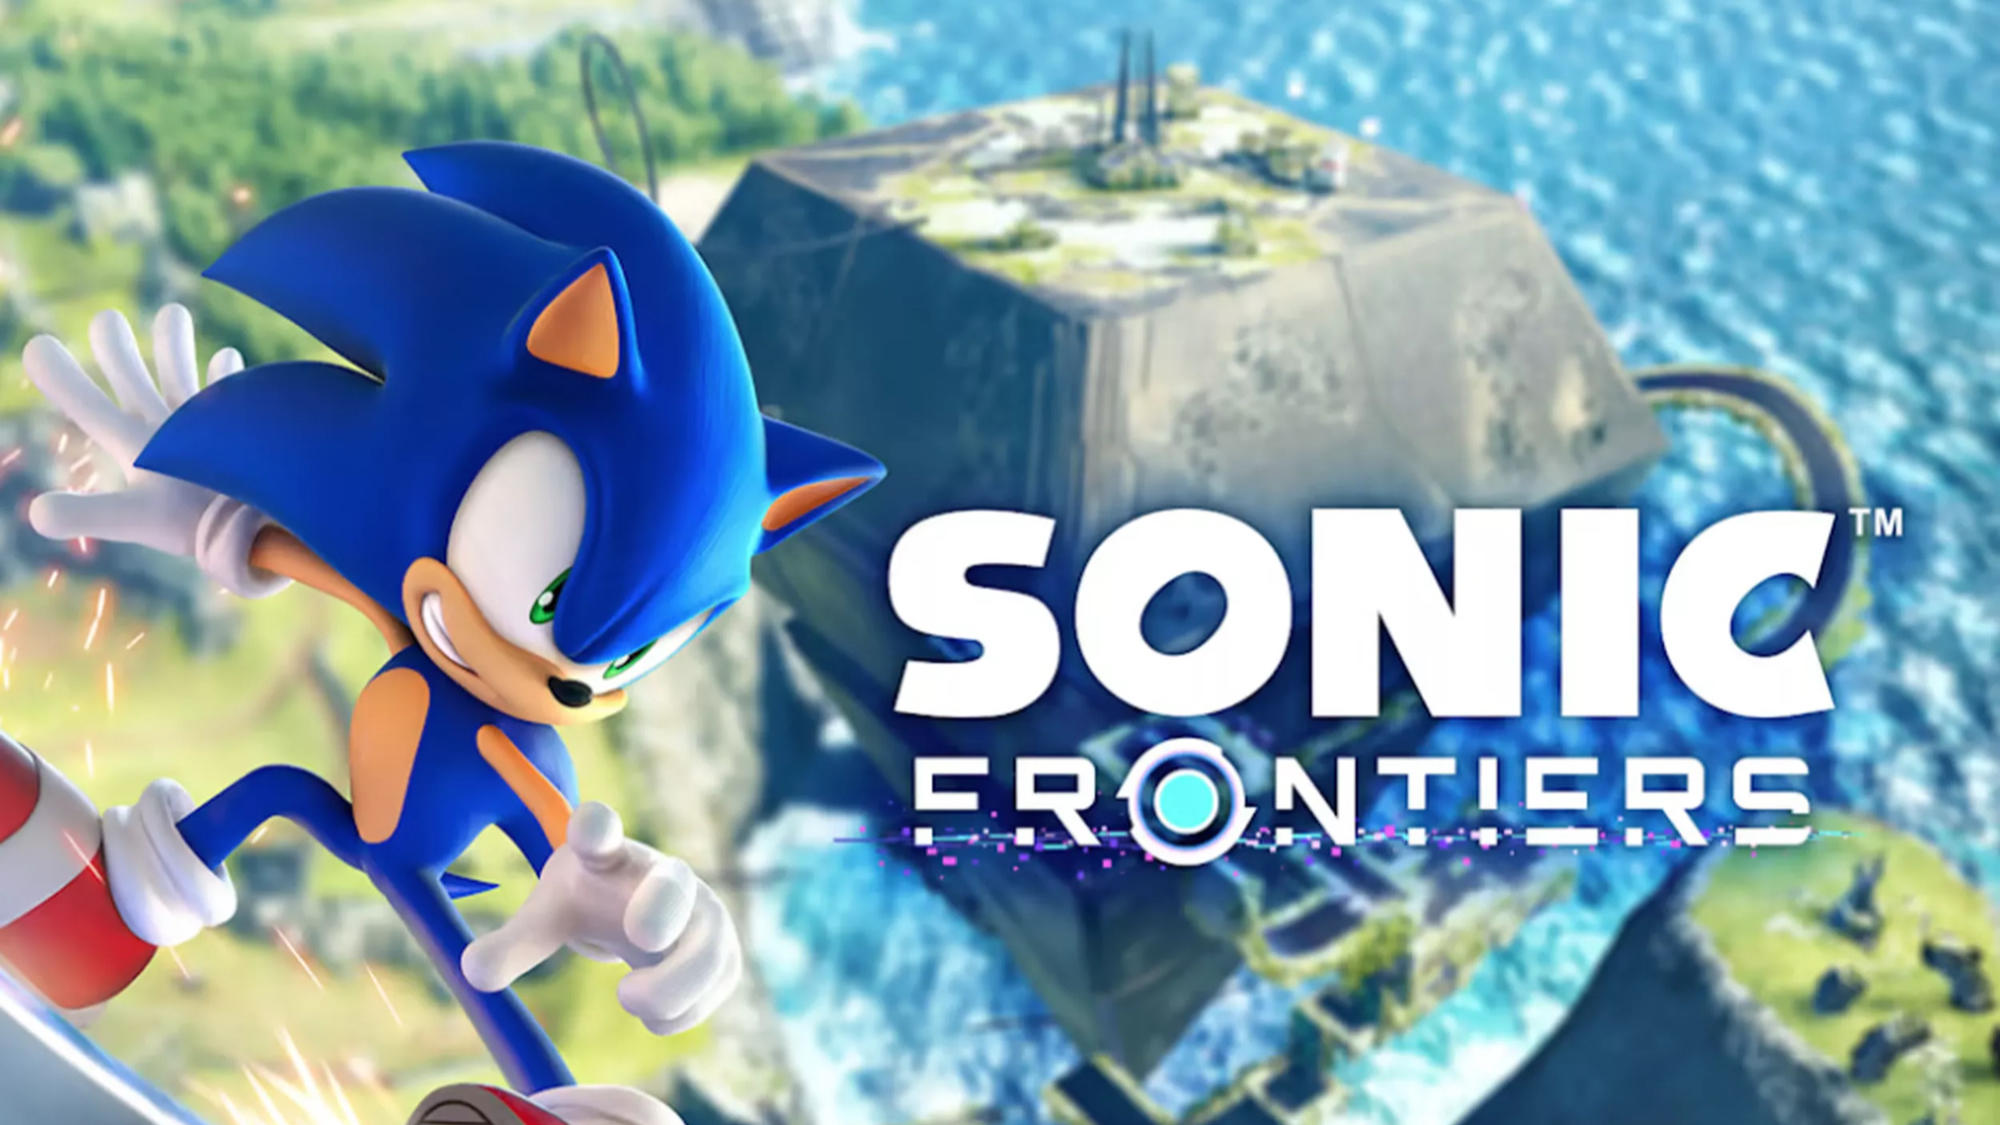 Sonic Frontiers on Mobile 